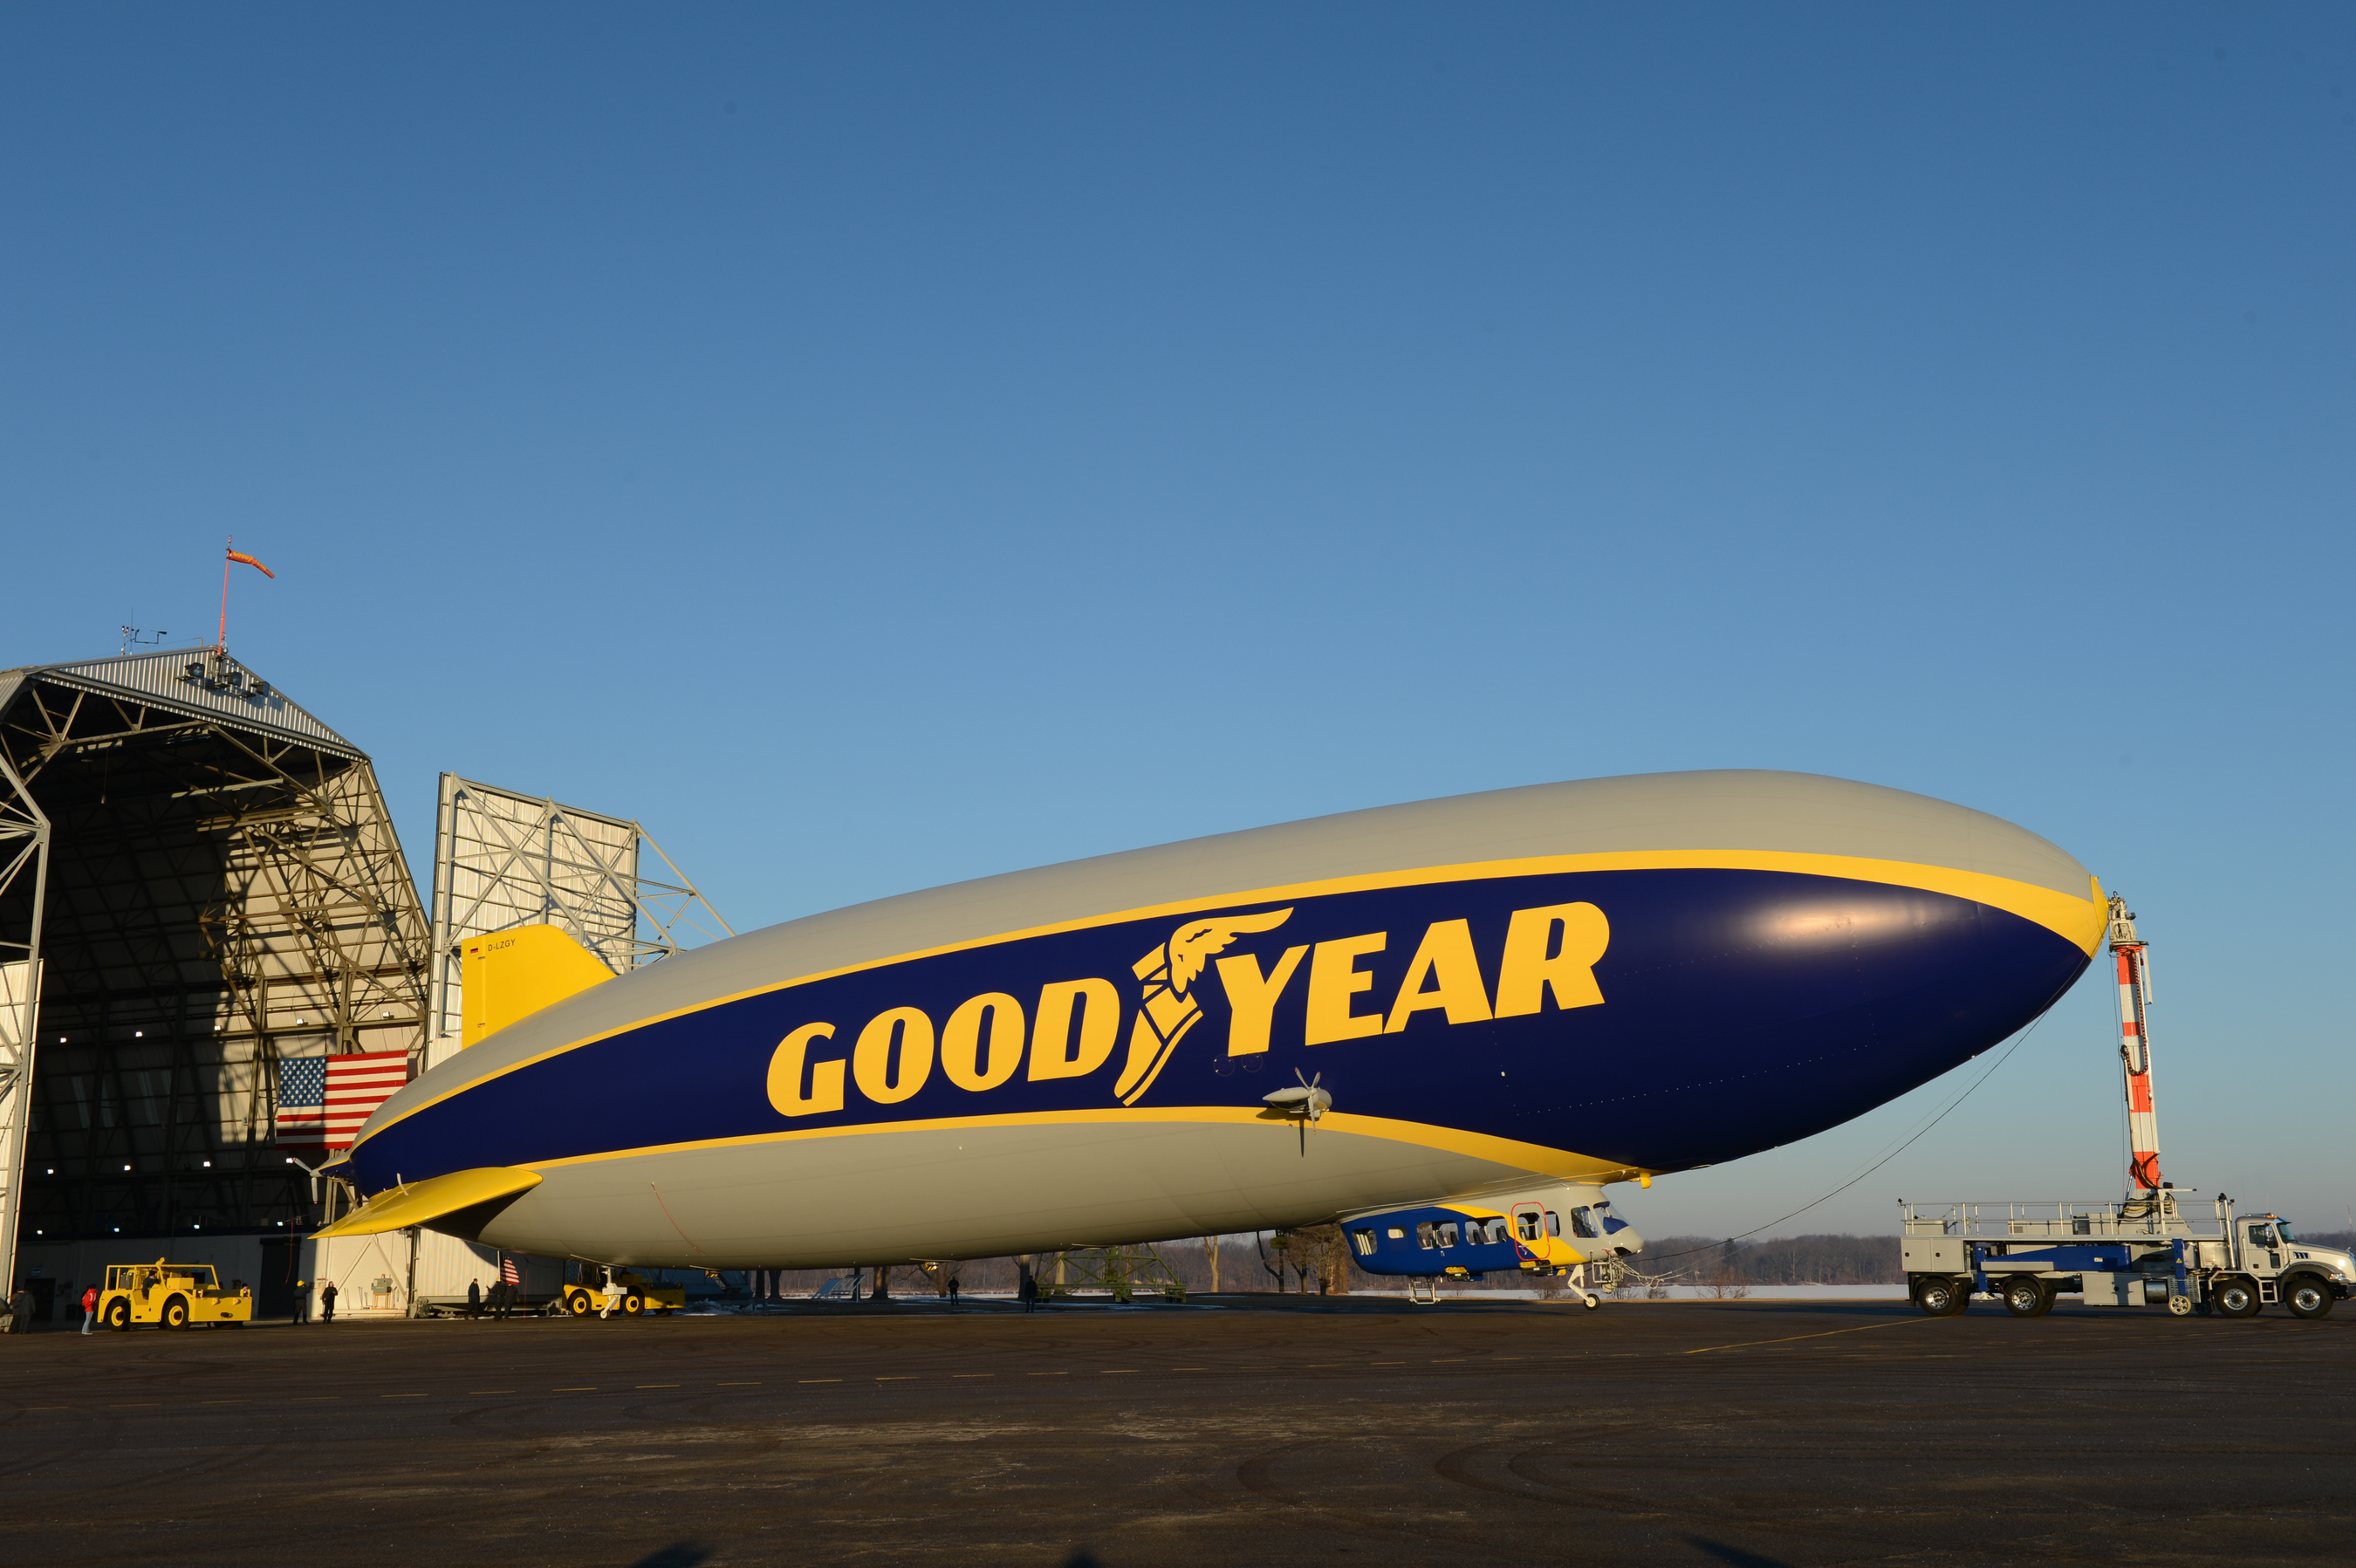 The Goodyear Tire & Rubber Company has selected ten finalists in its national "Name the Blimp" contest for its newest airship, which was unveiled in March. Voting by the public will continue through May 9. (PRNewsFoto/The Goodyear Tire & Rubber Co...)